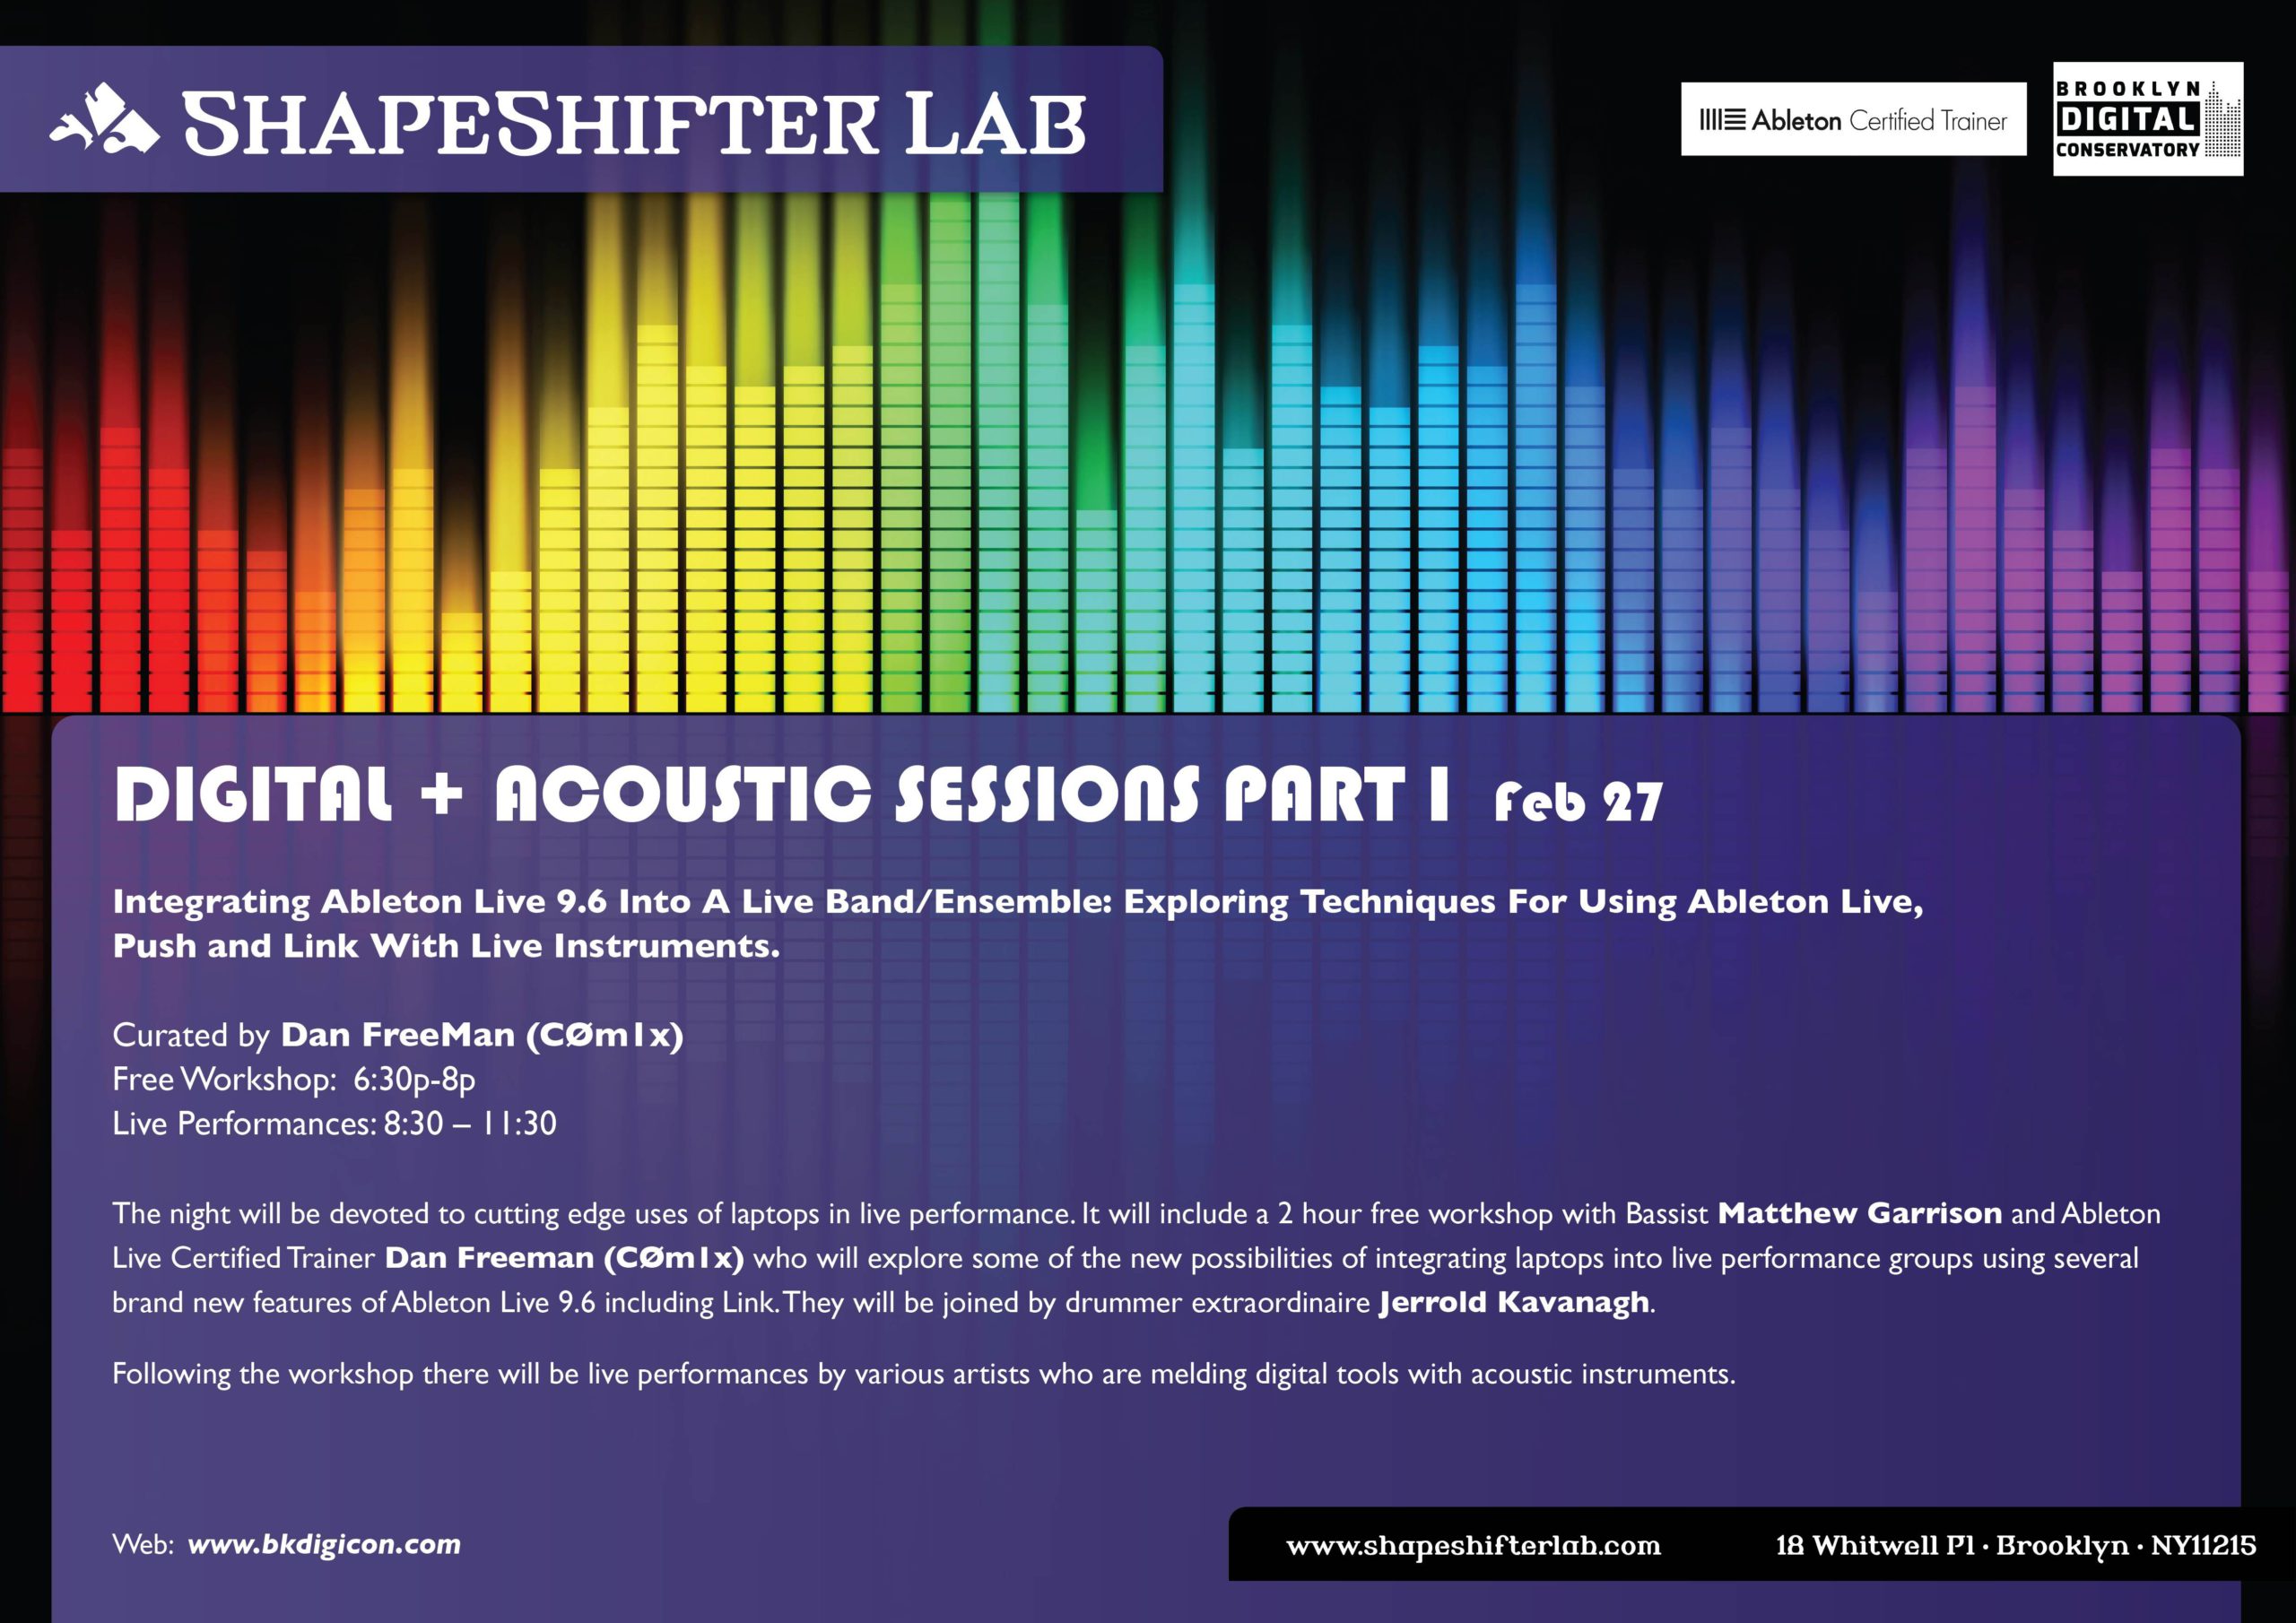 Brooklyn Digital Conservatory and The ShapeShifter Lab Present: Digital and Acoustic Sessions. Part I